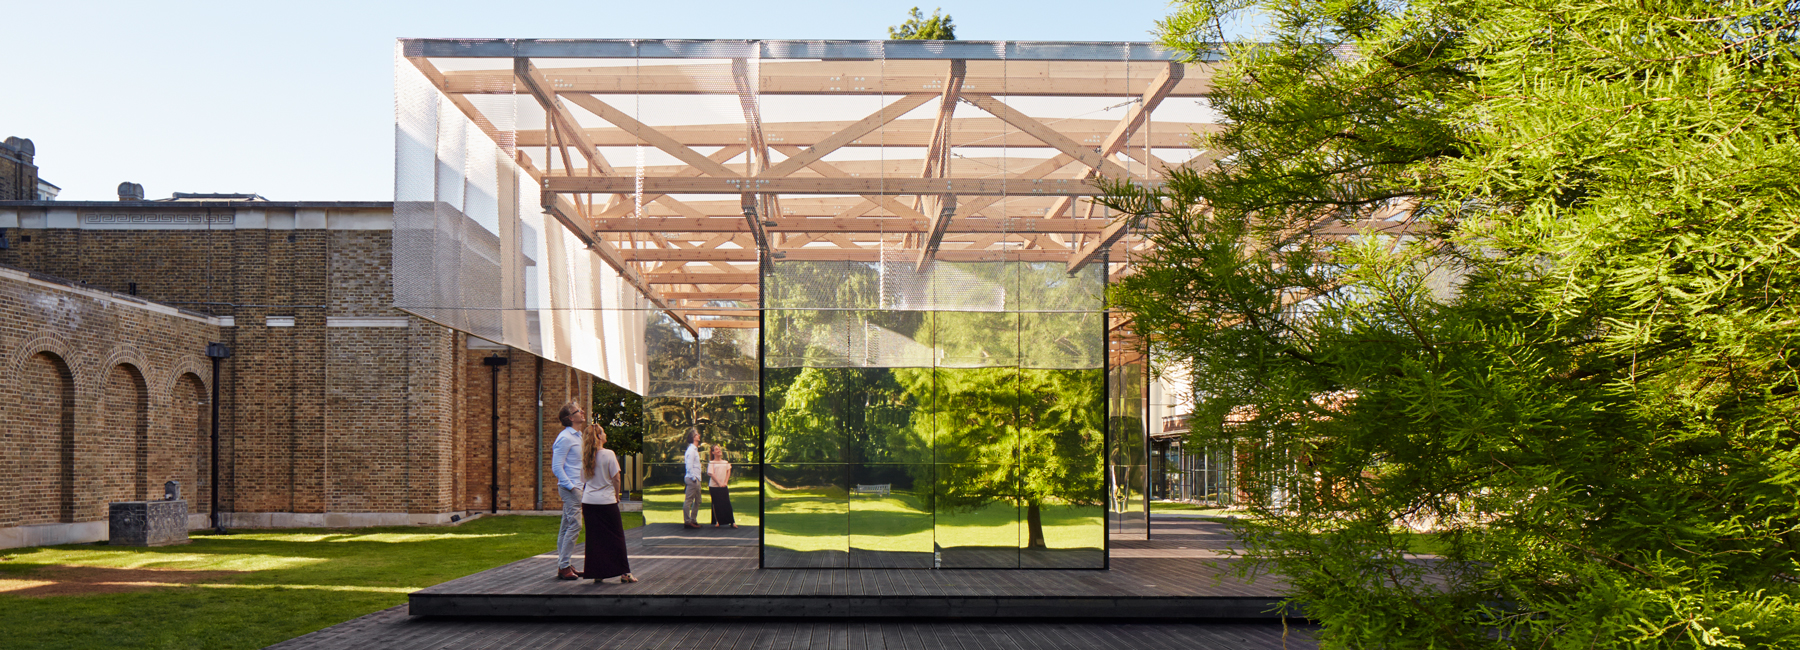 IF_DO's dulwich pavilion brings out the brilliance of london's architectural scene